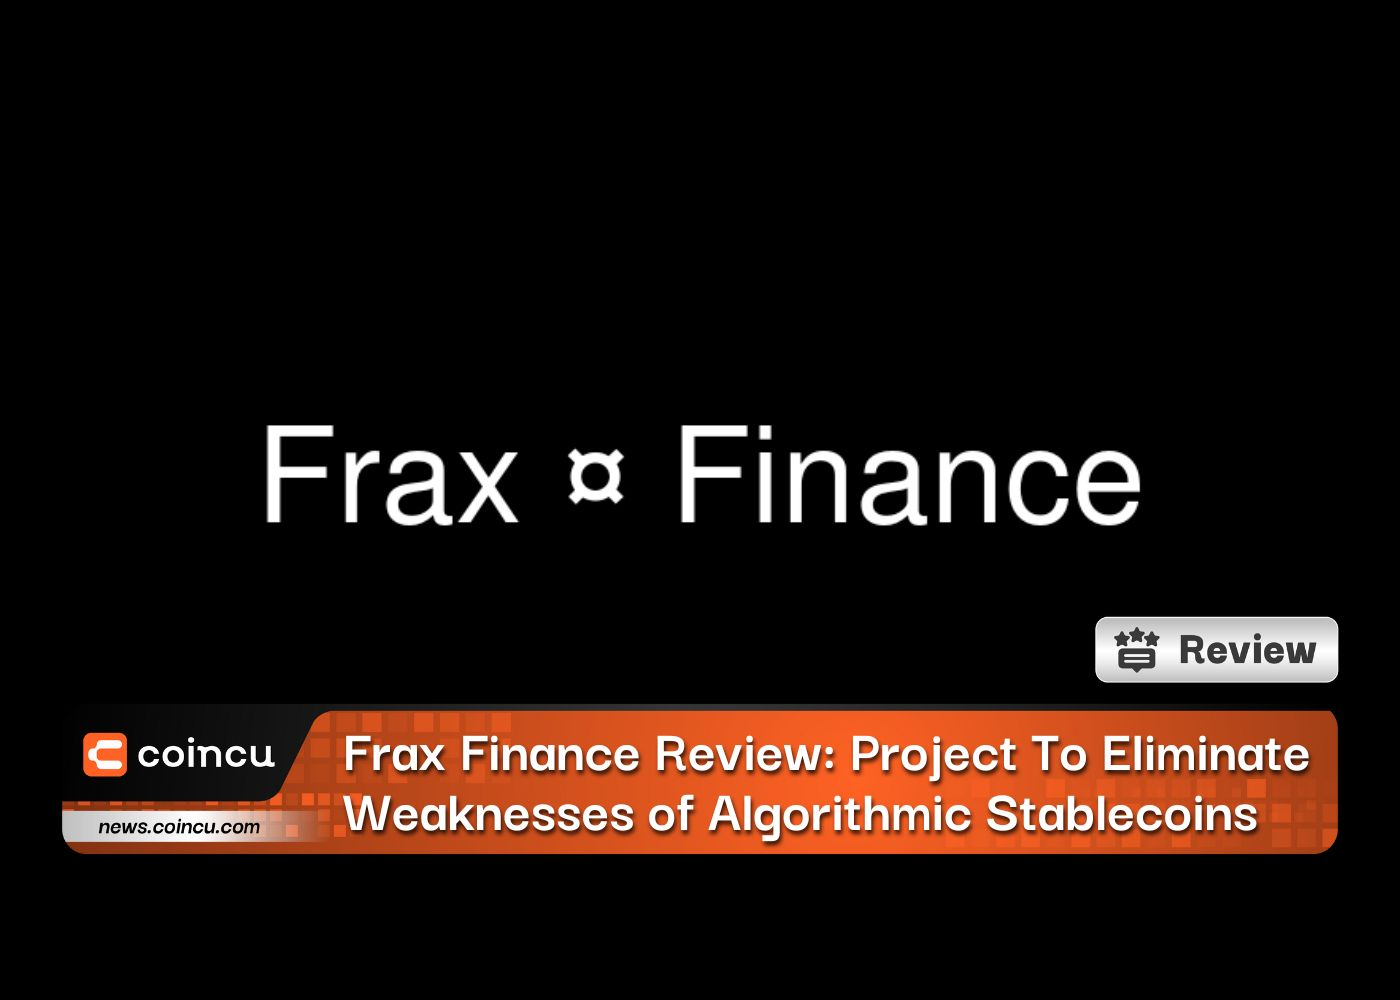 Frax Finance Review: Project To Eliminate Weaknesses of Algorithmic Stablecoins